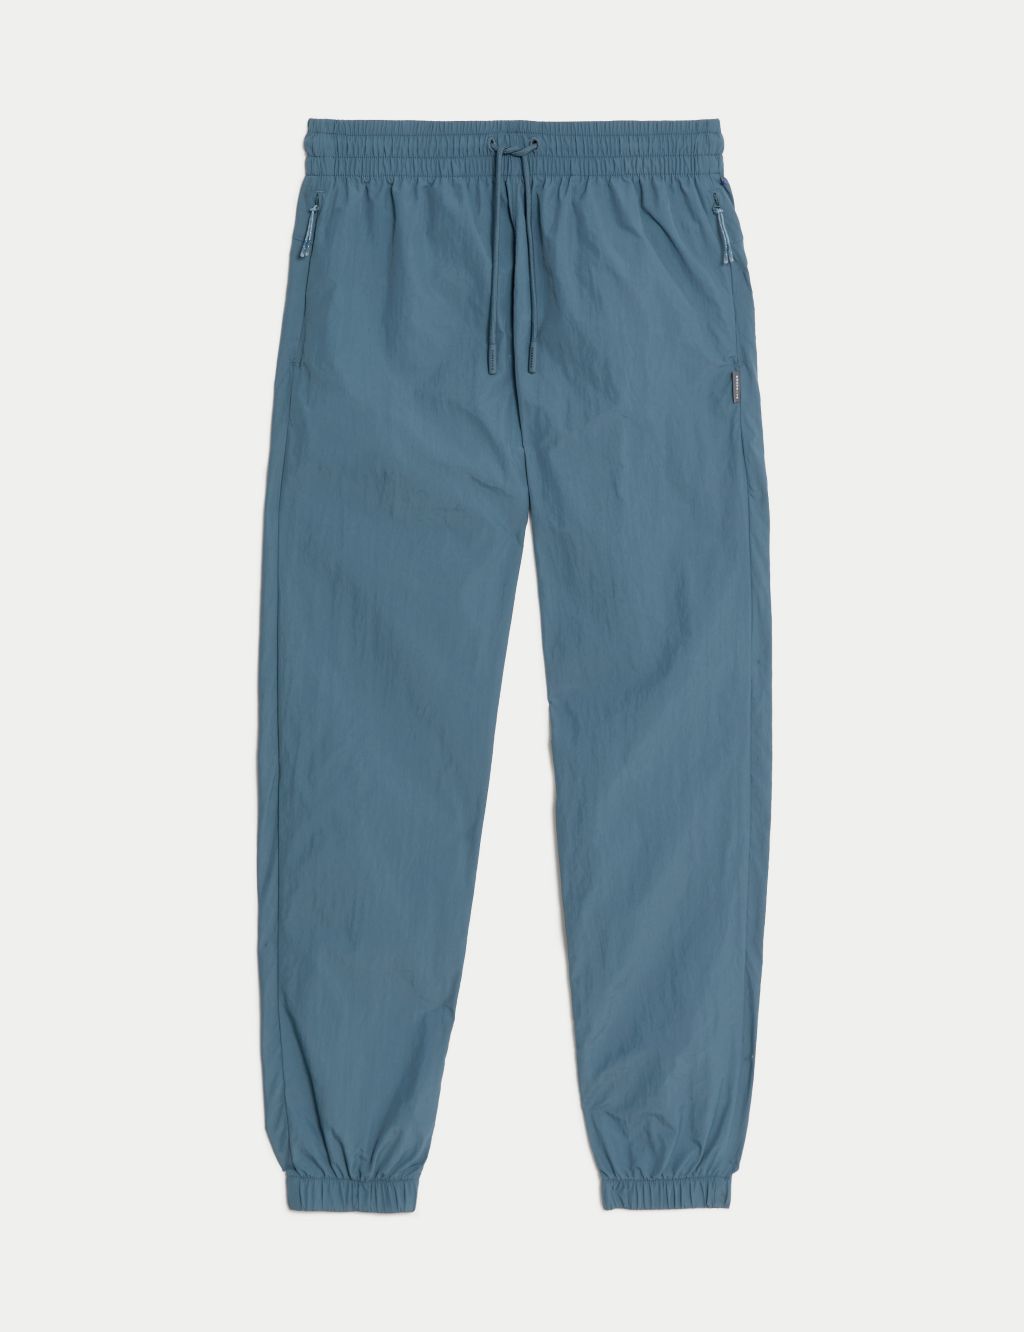 Stormwear™ Lightweight Relaxed Track Pants image 2